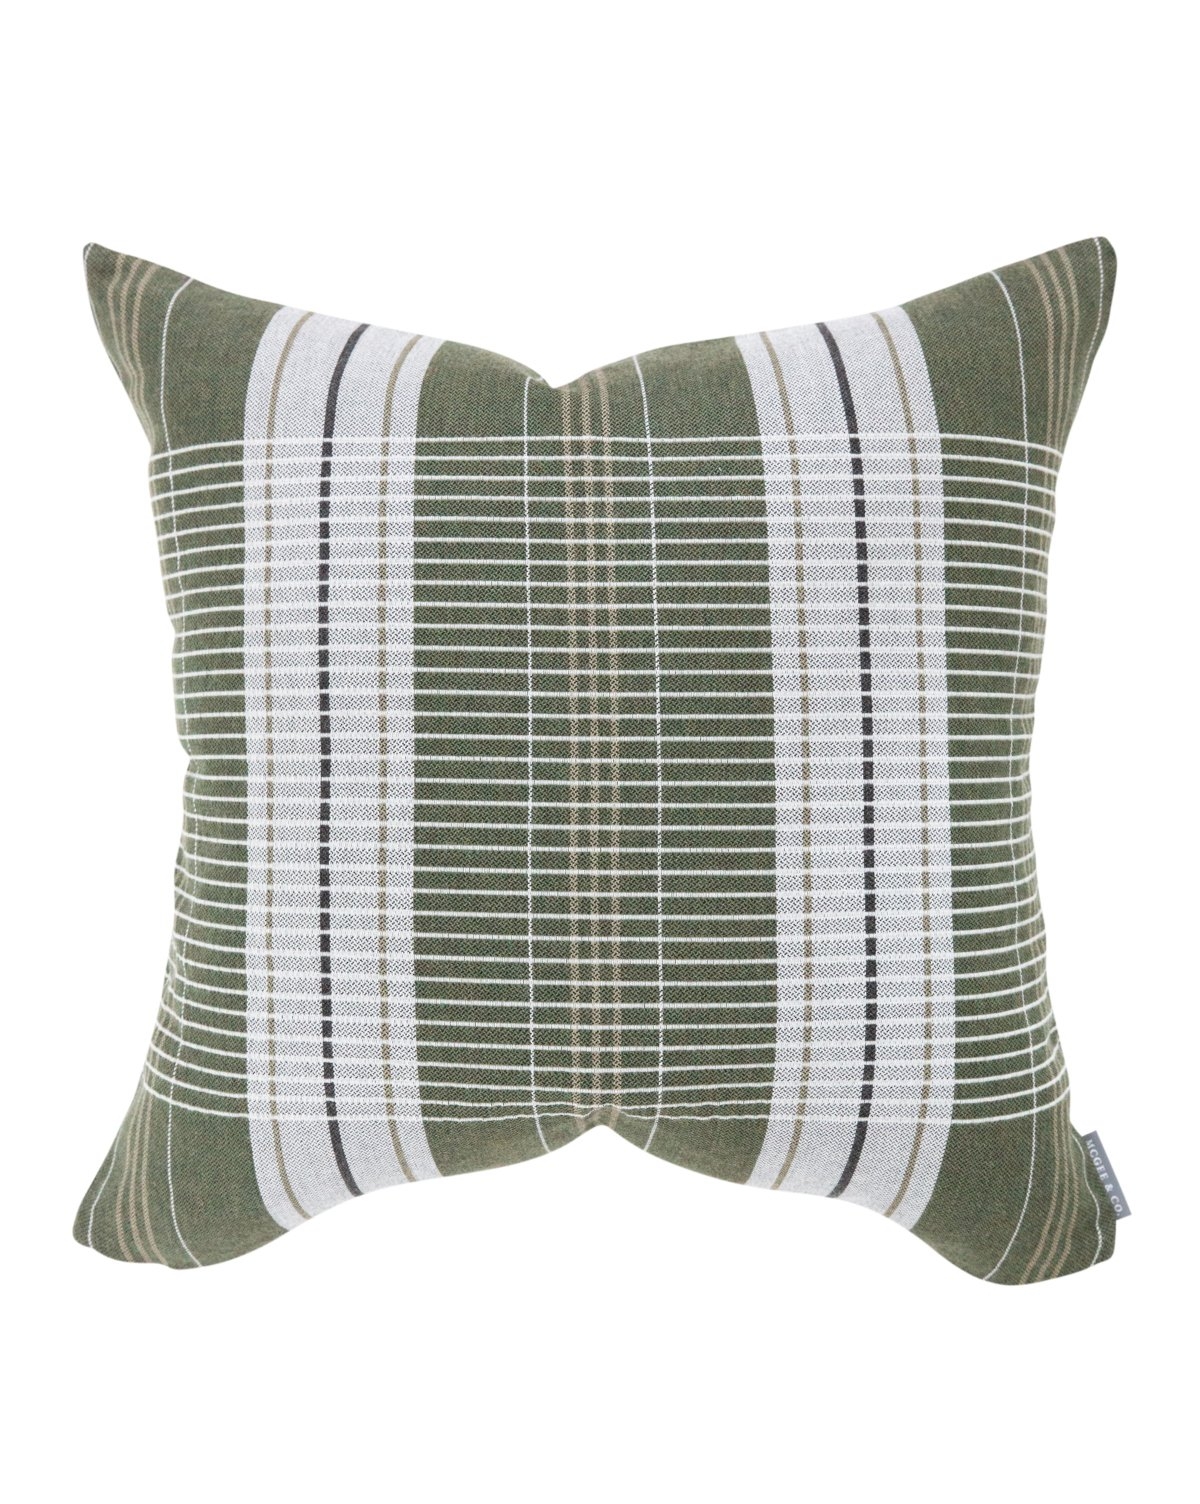 OXFORD WOVEN PLAID PILLOW WITHOUT INSERT, GREEN, 20" x 20" - Image 0